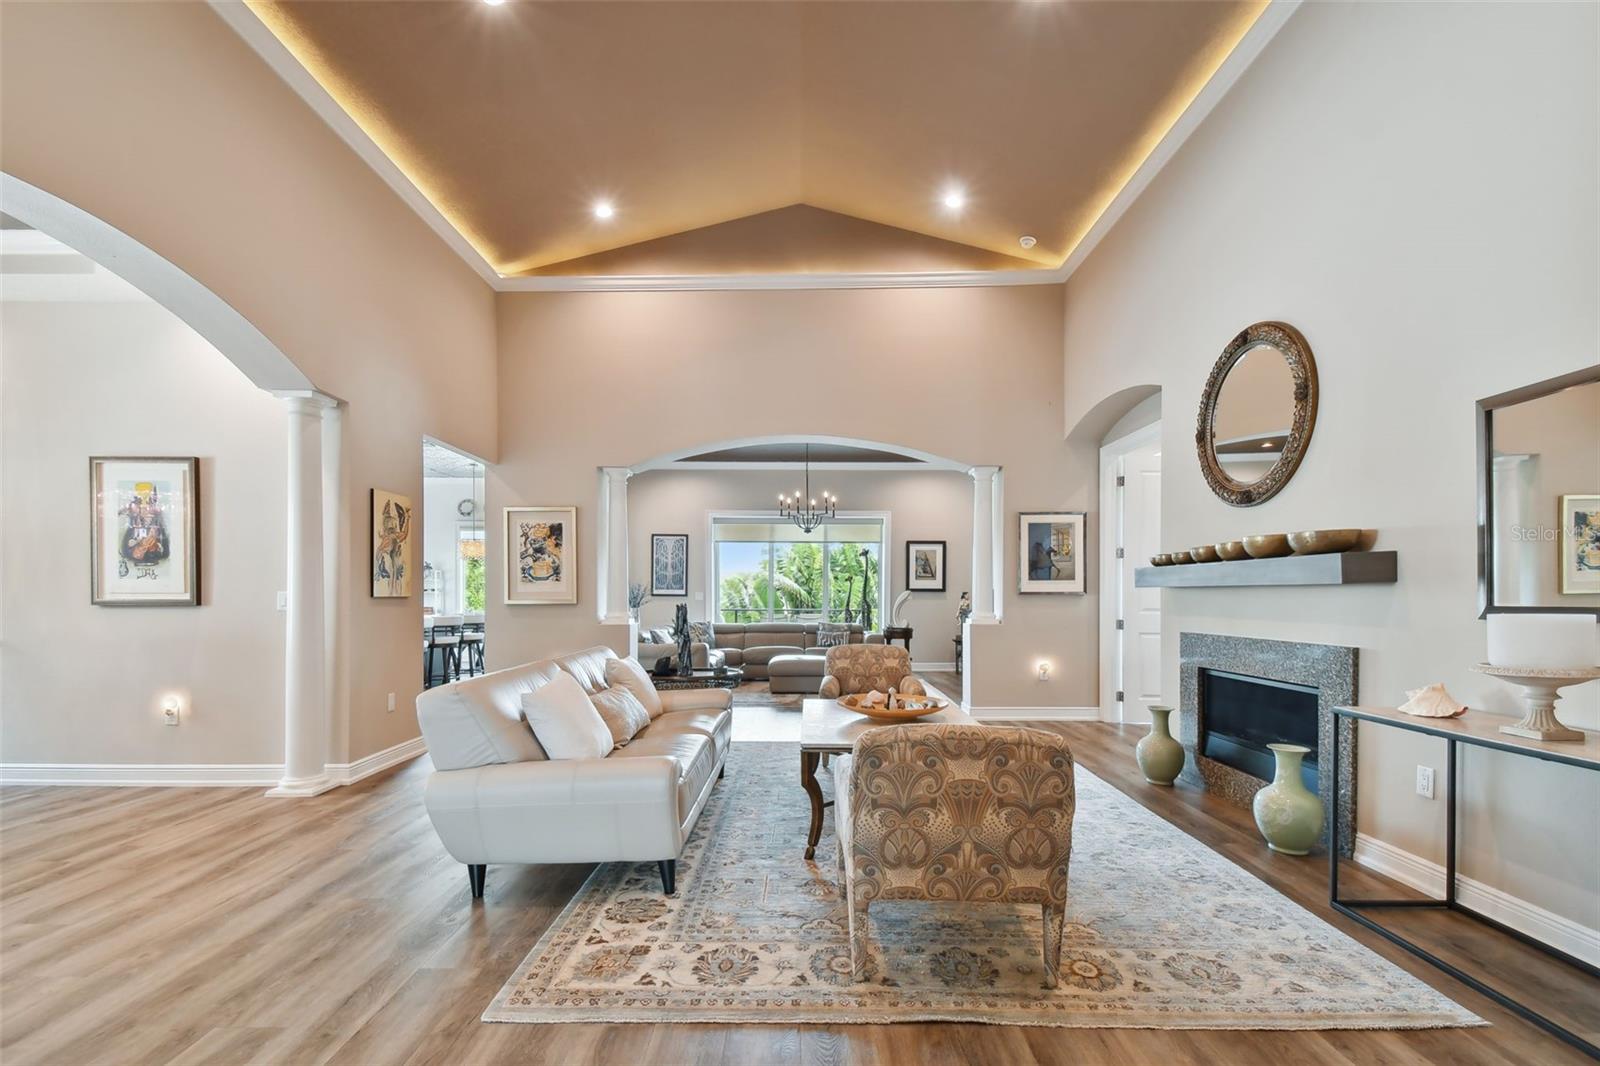 Uplighting highlights the vaulted ceilings